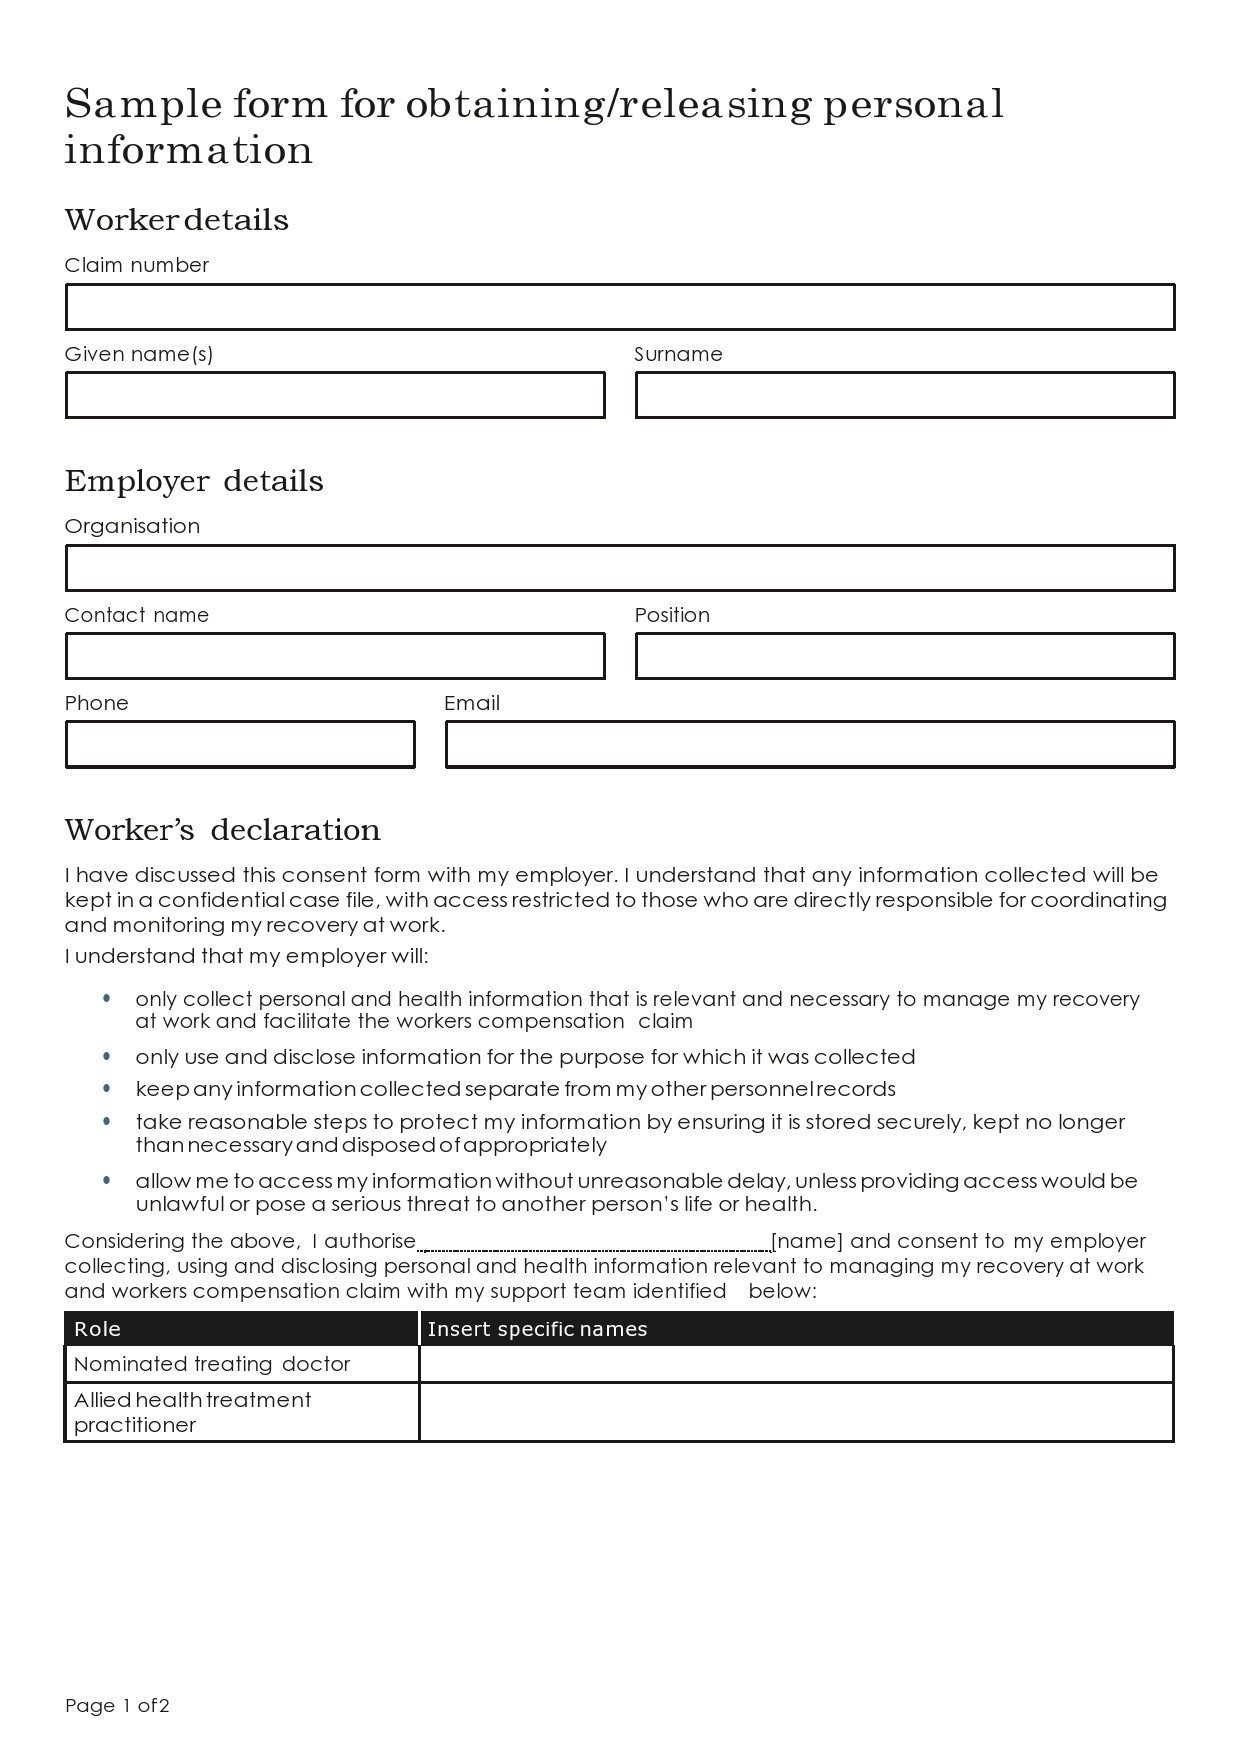 Free personal information form 24